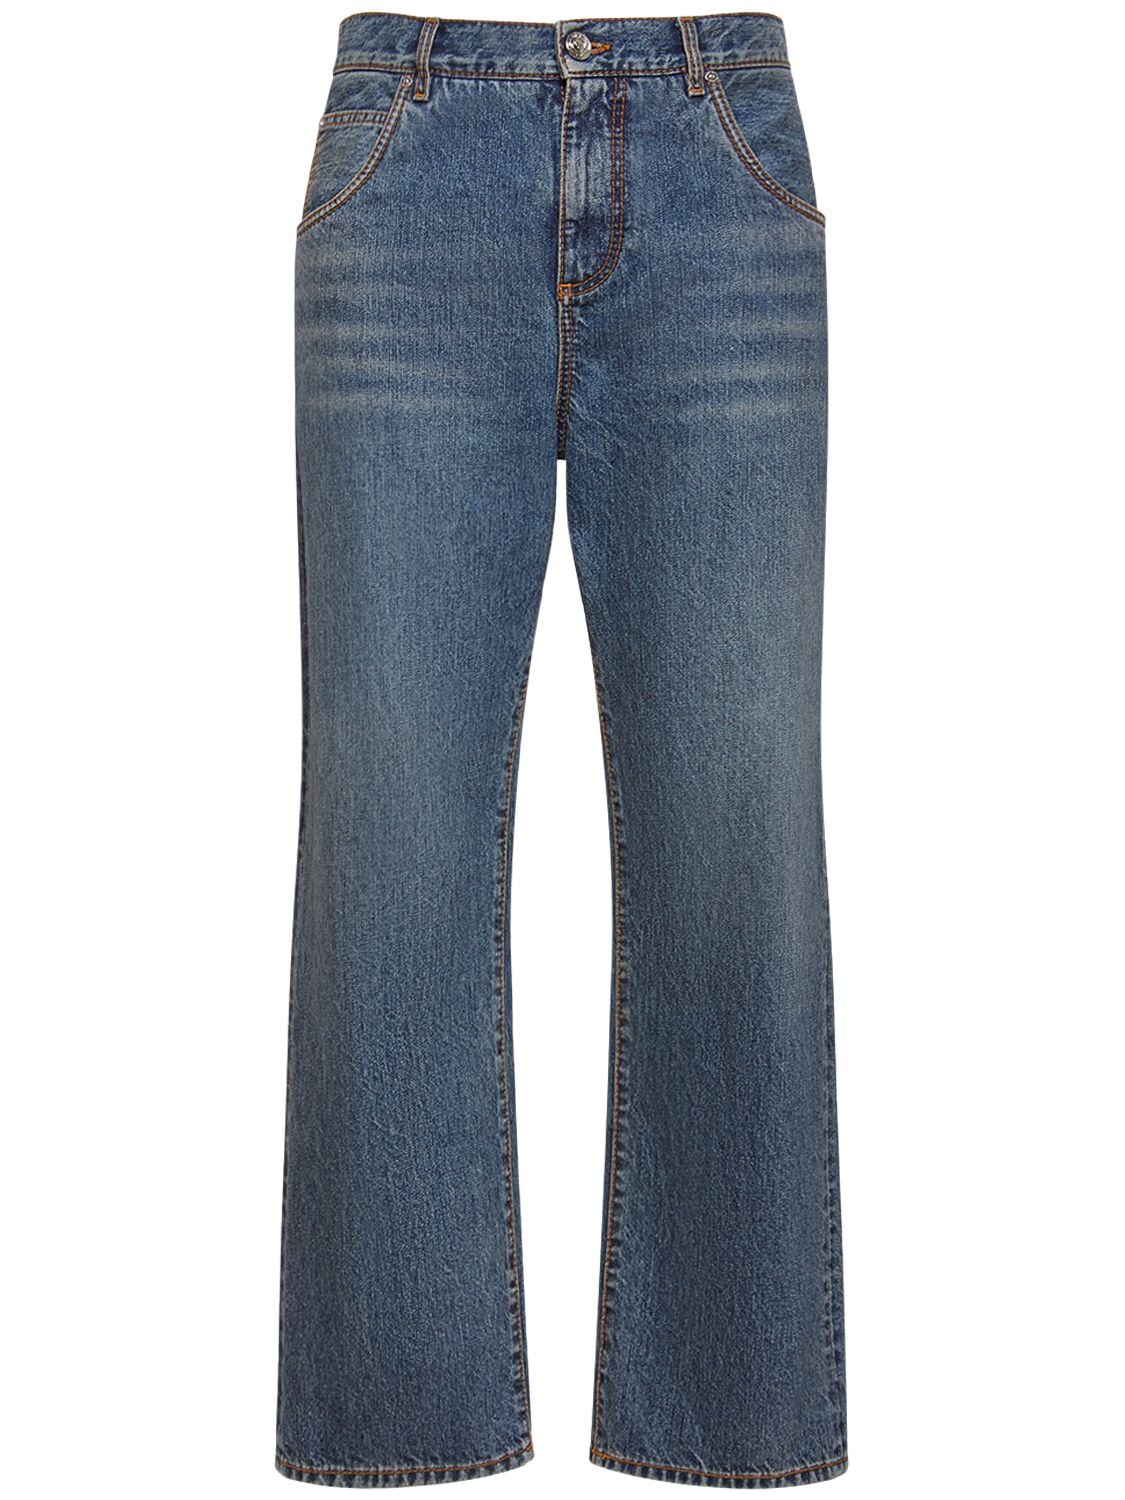 Image of Relaxed Fit Cotton Denim Jeans